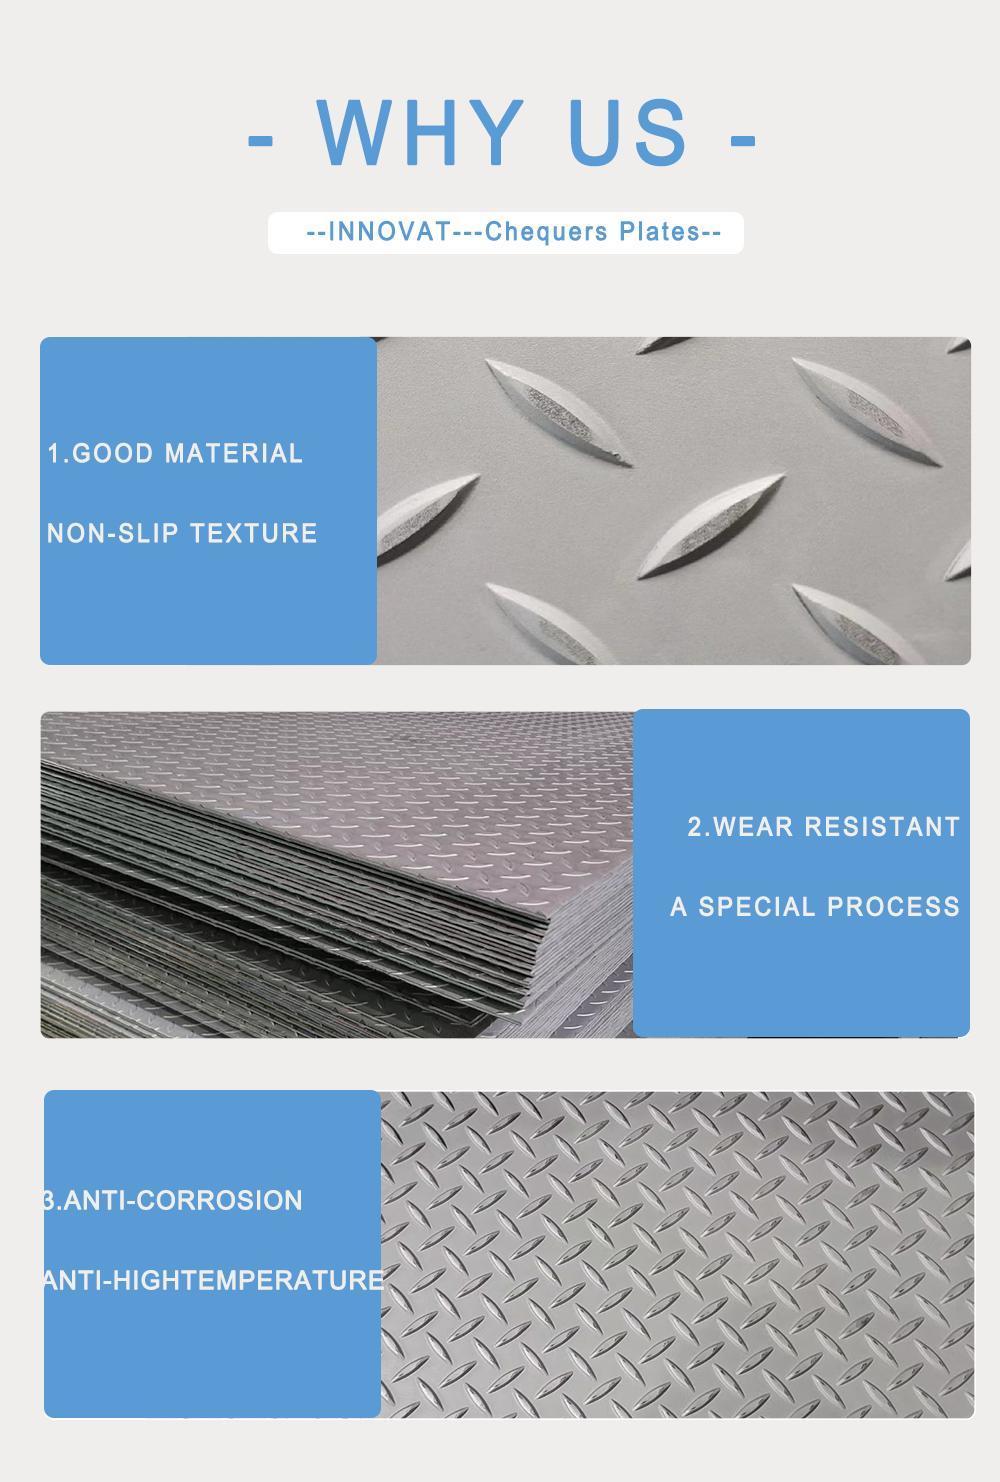 Cheap Dimple Checkered Pattern Polished Thin Aluminum Diamond Plate/Sheet Coil Alloy Check Plate Embossed Perforated Aluminum Sheet